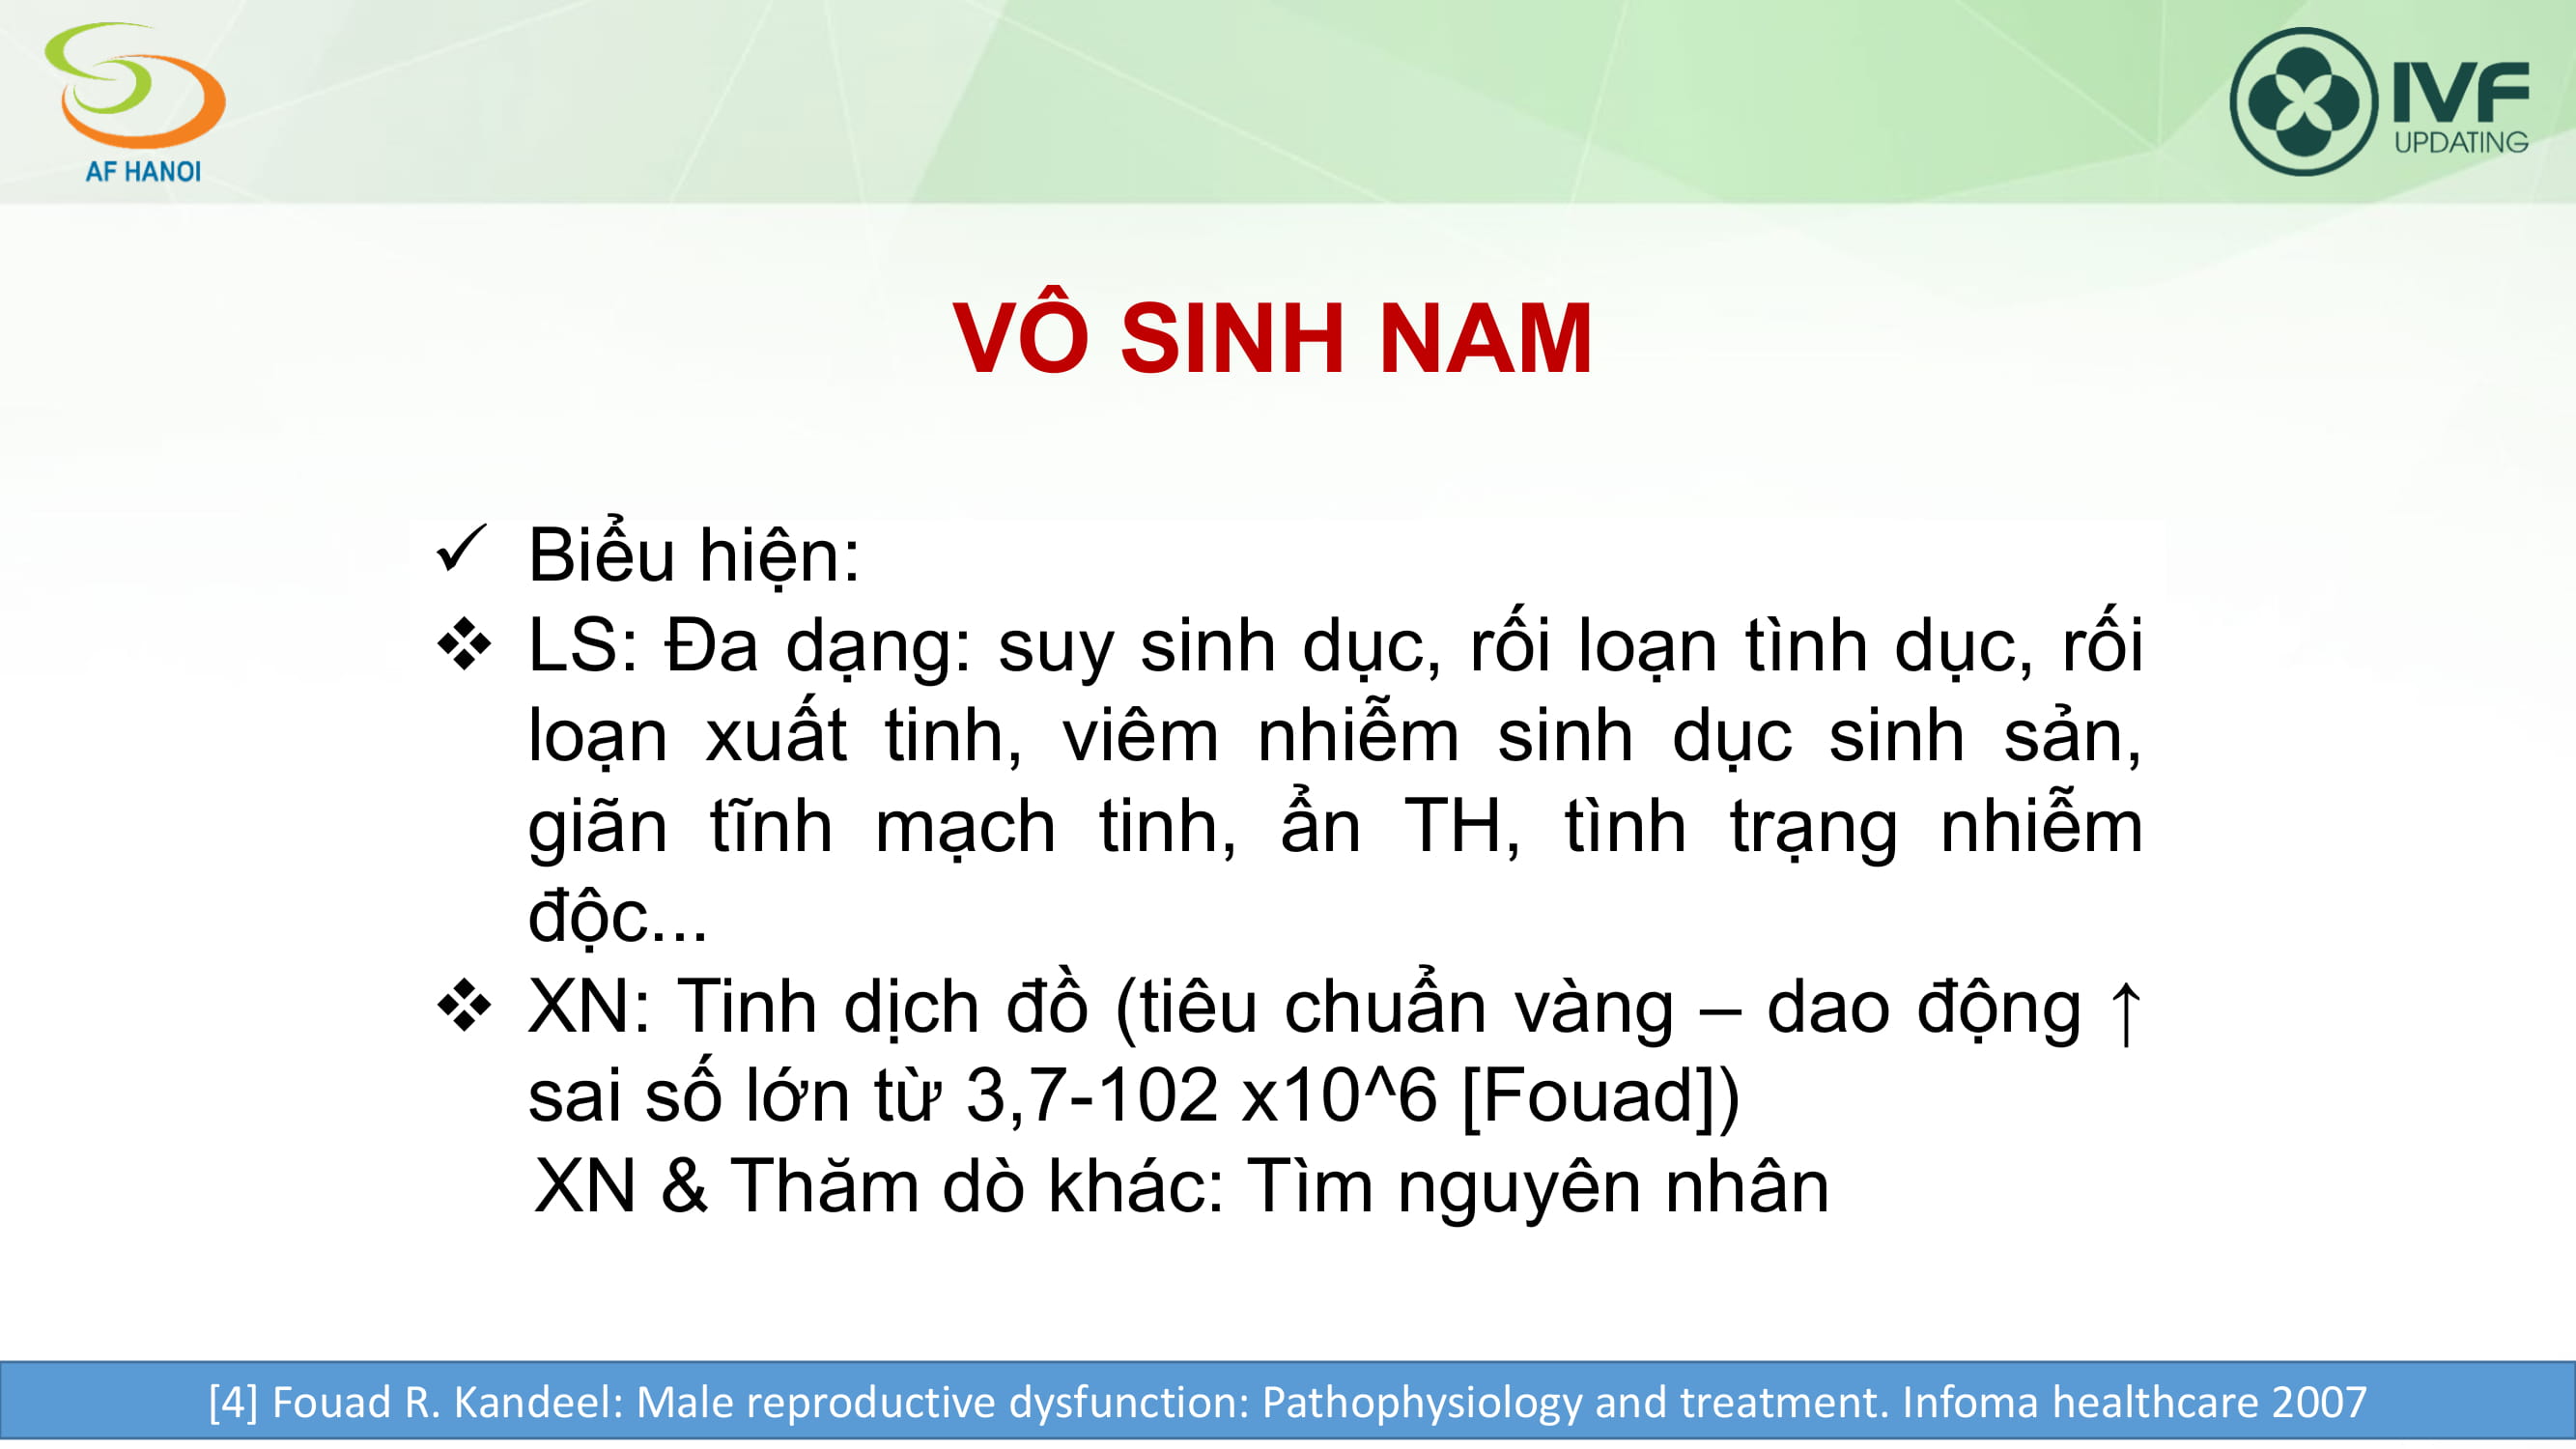 BS Nguyen Ba Hung - Chi dinh thuoc kich thich sinh tinh1-04